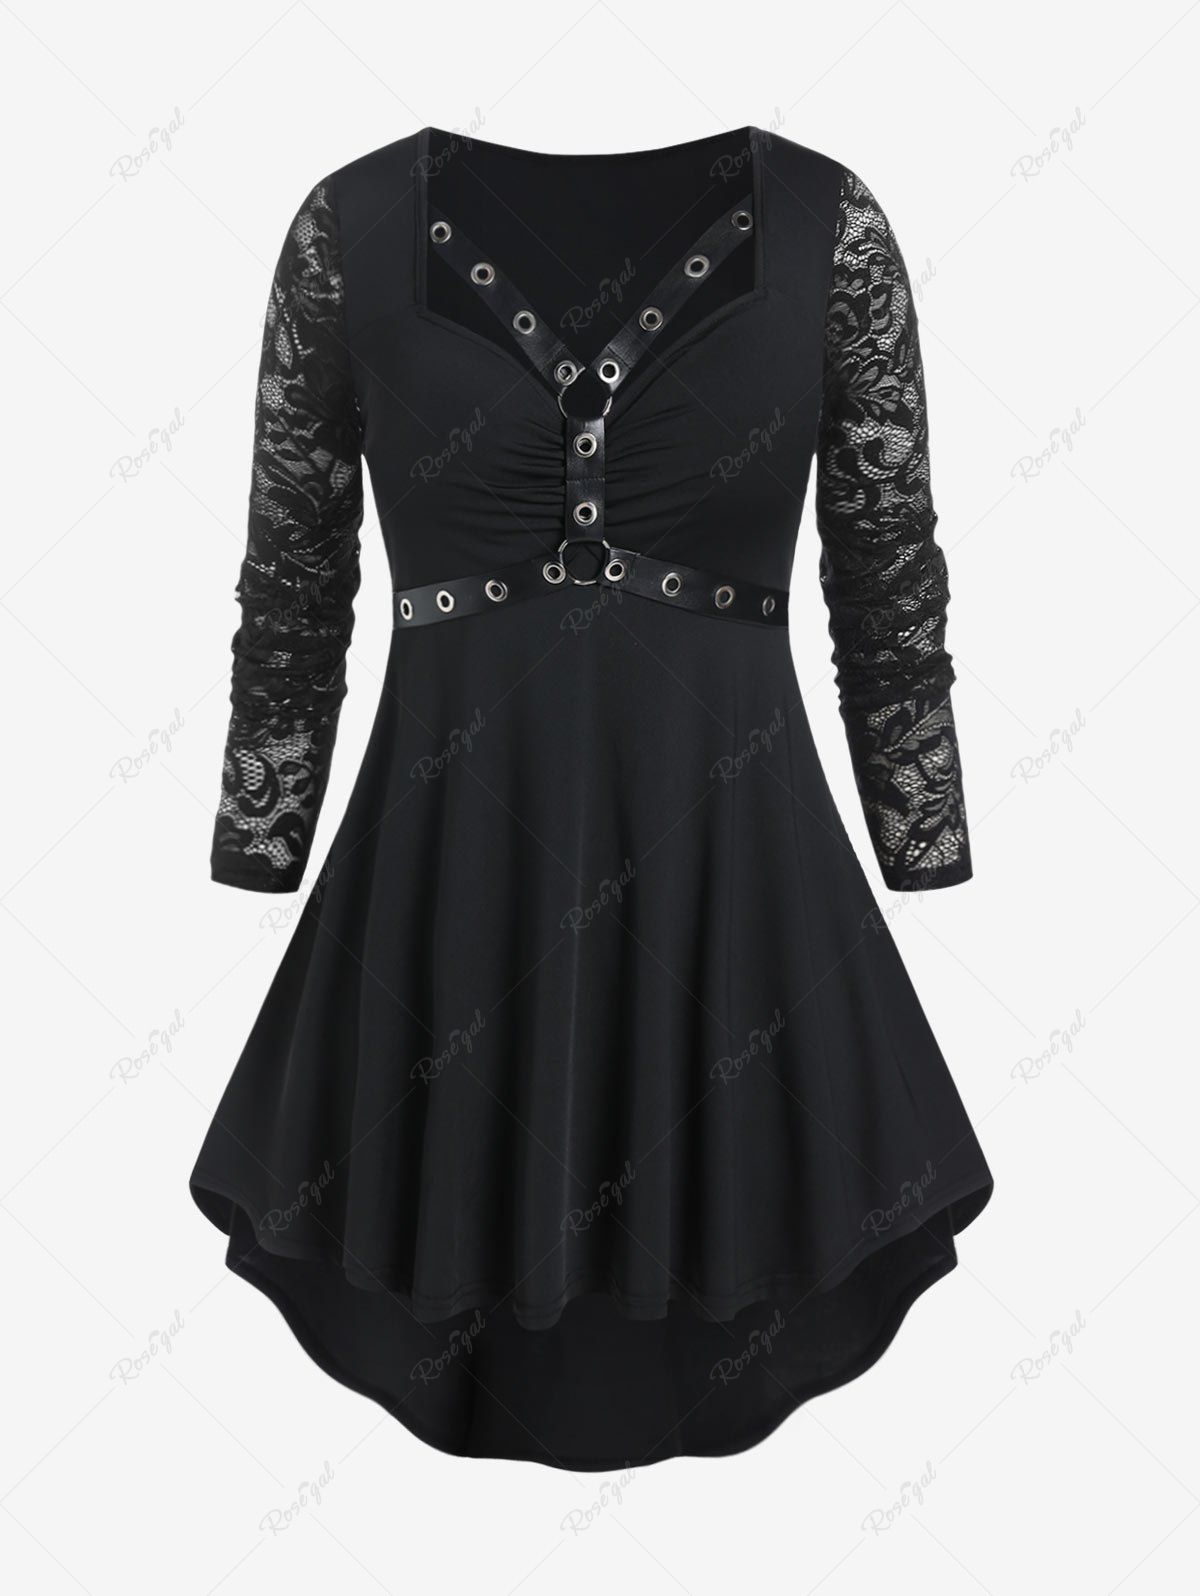 Best Gothic Lace Sleeve Harness Grommets High Low Tee  